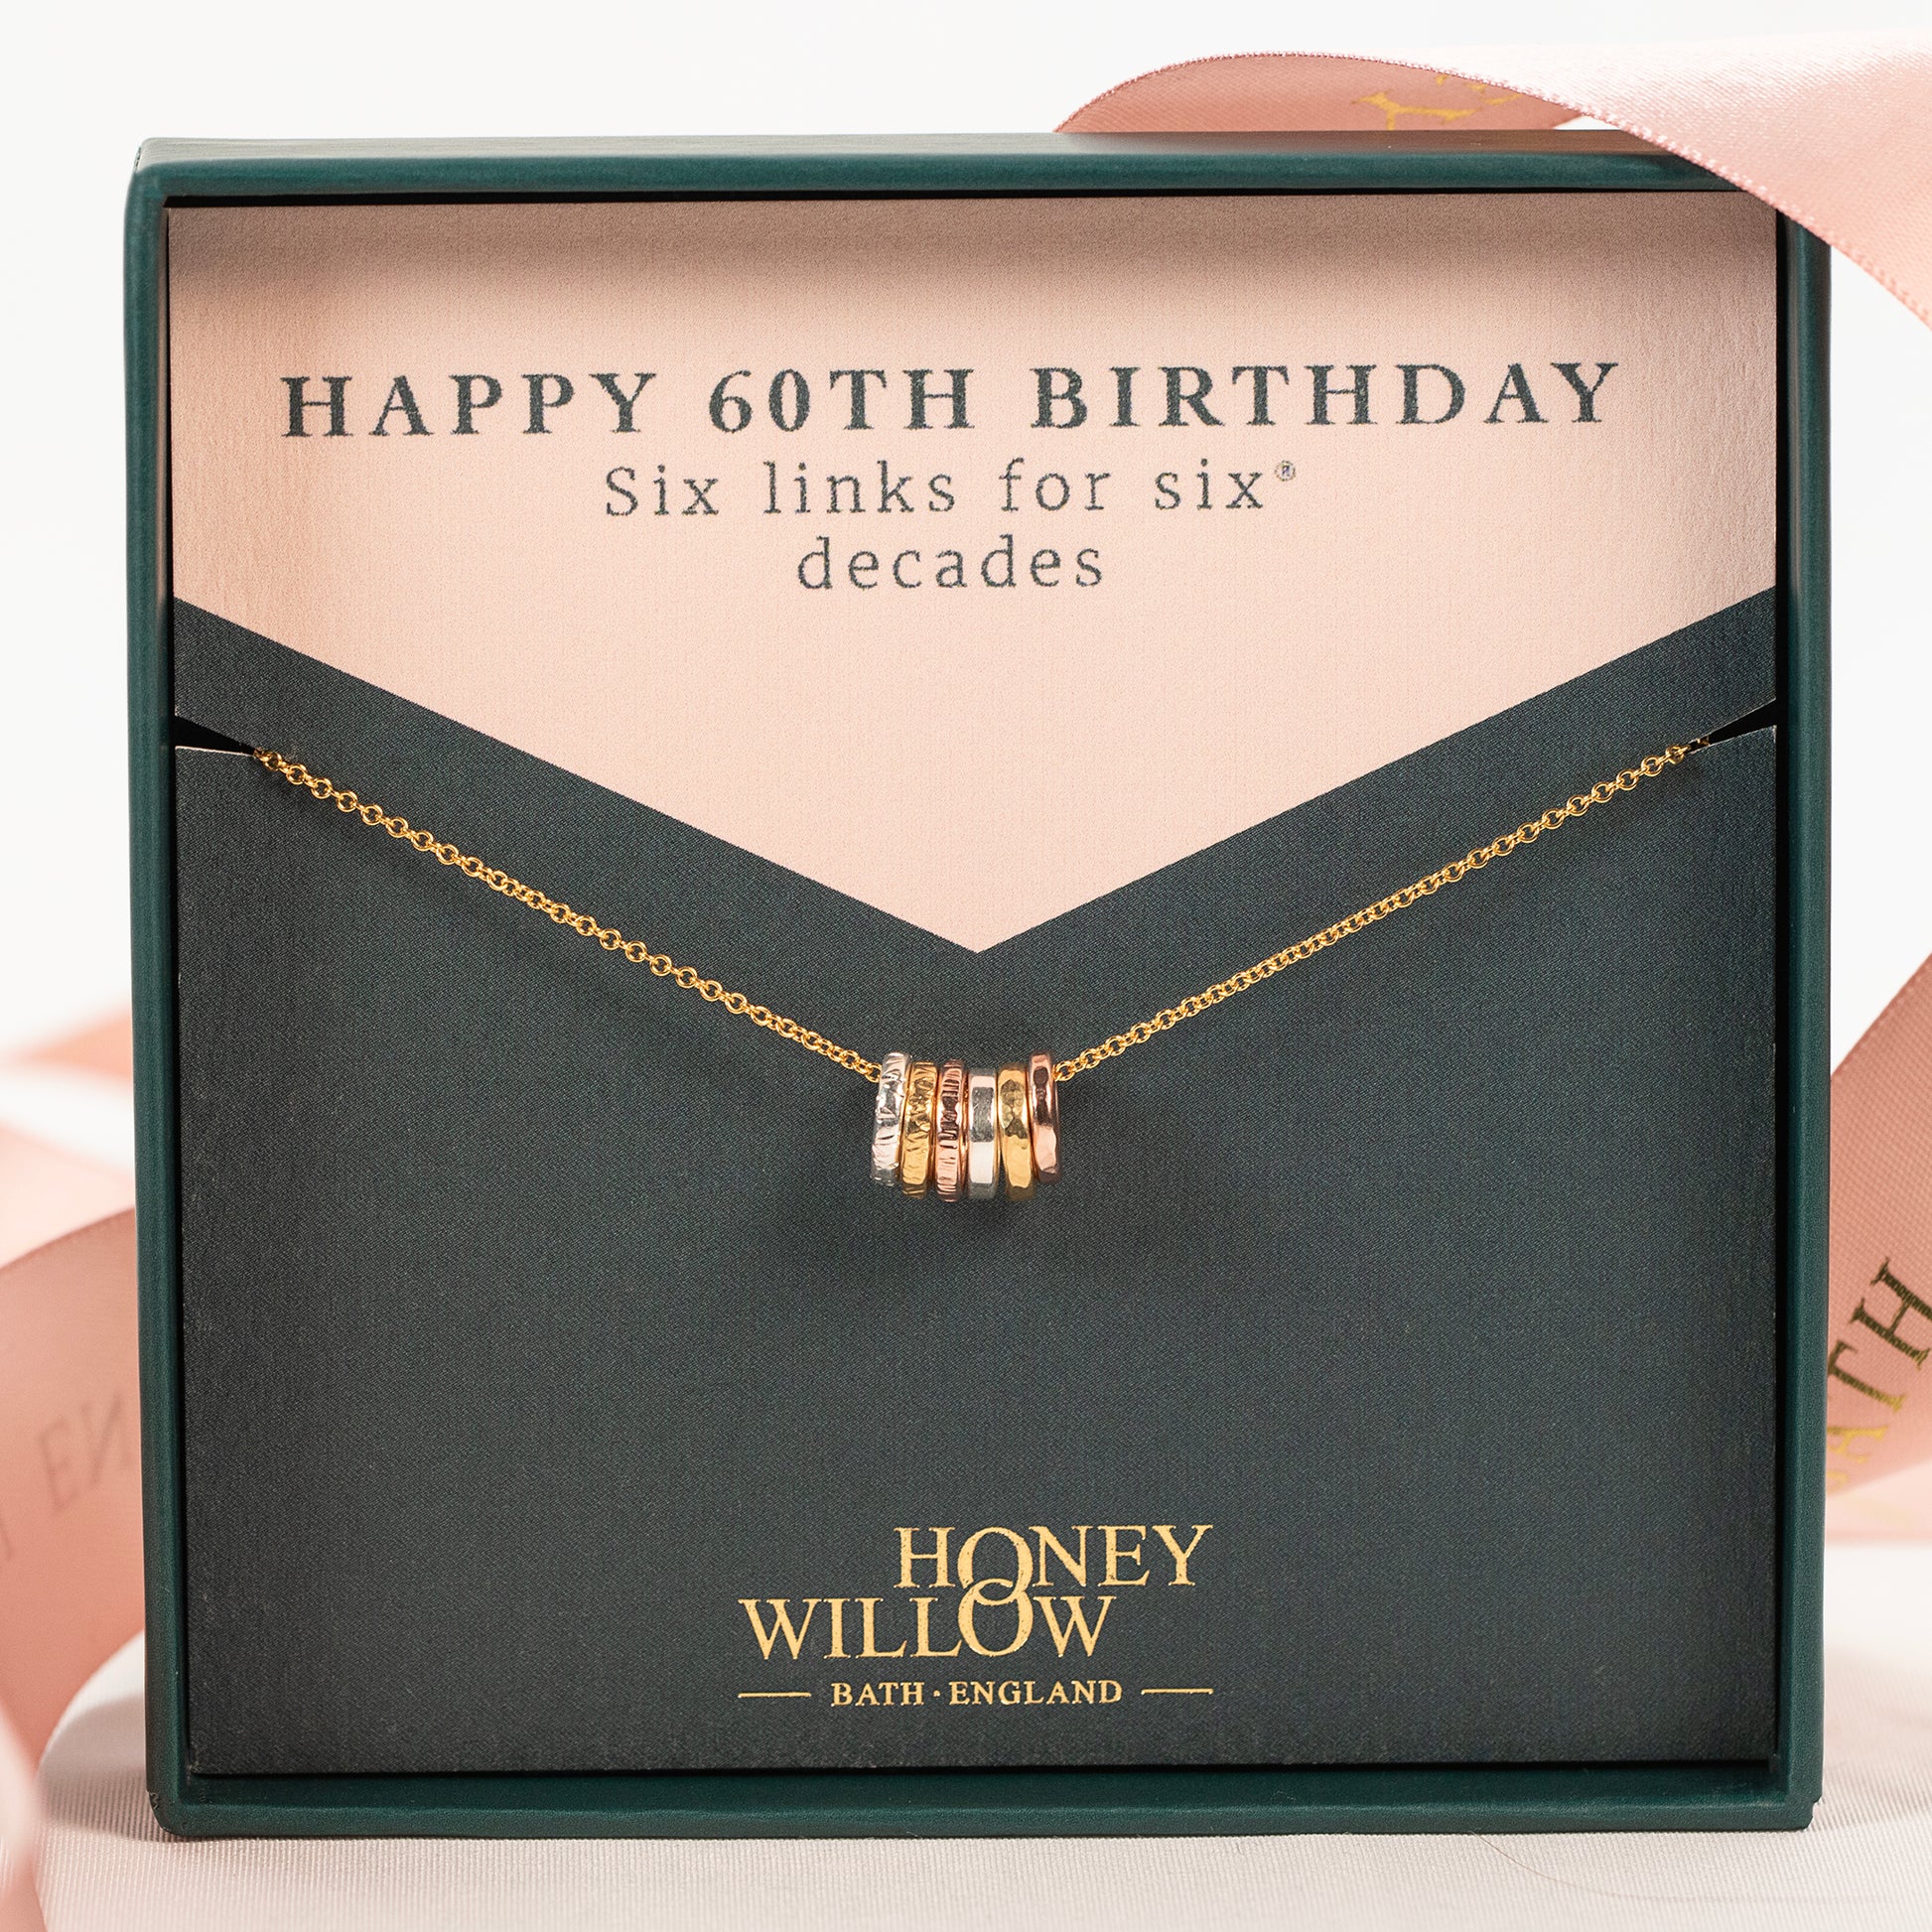 60th Birthday Necklace - 6 Links for 6 Decades - Tiny Links